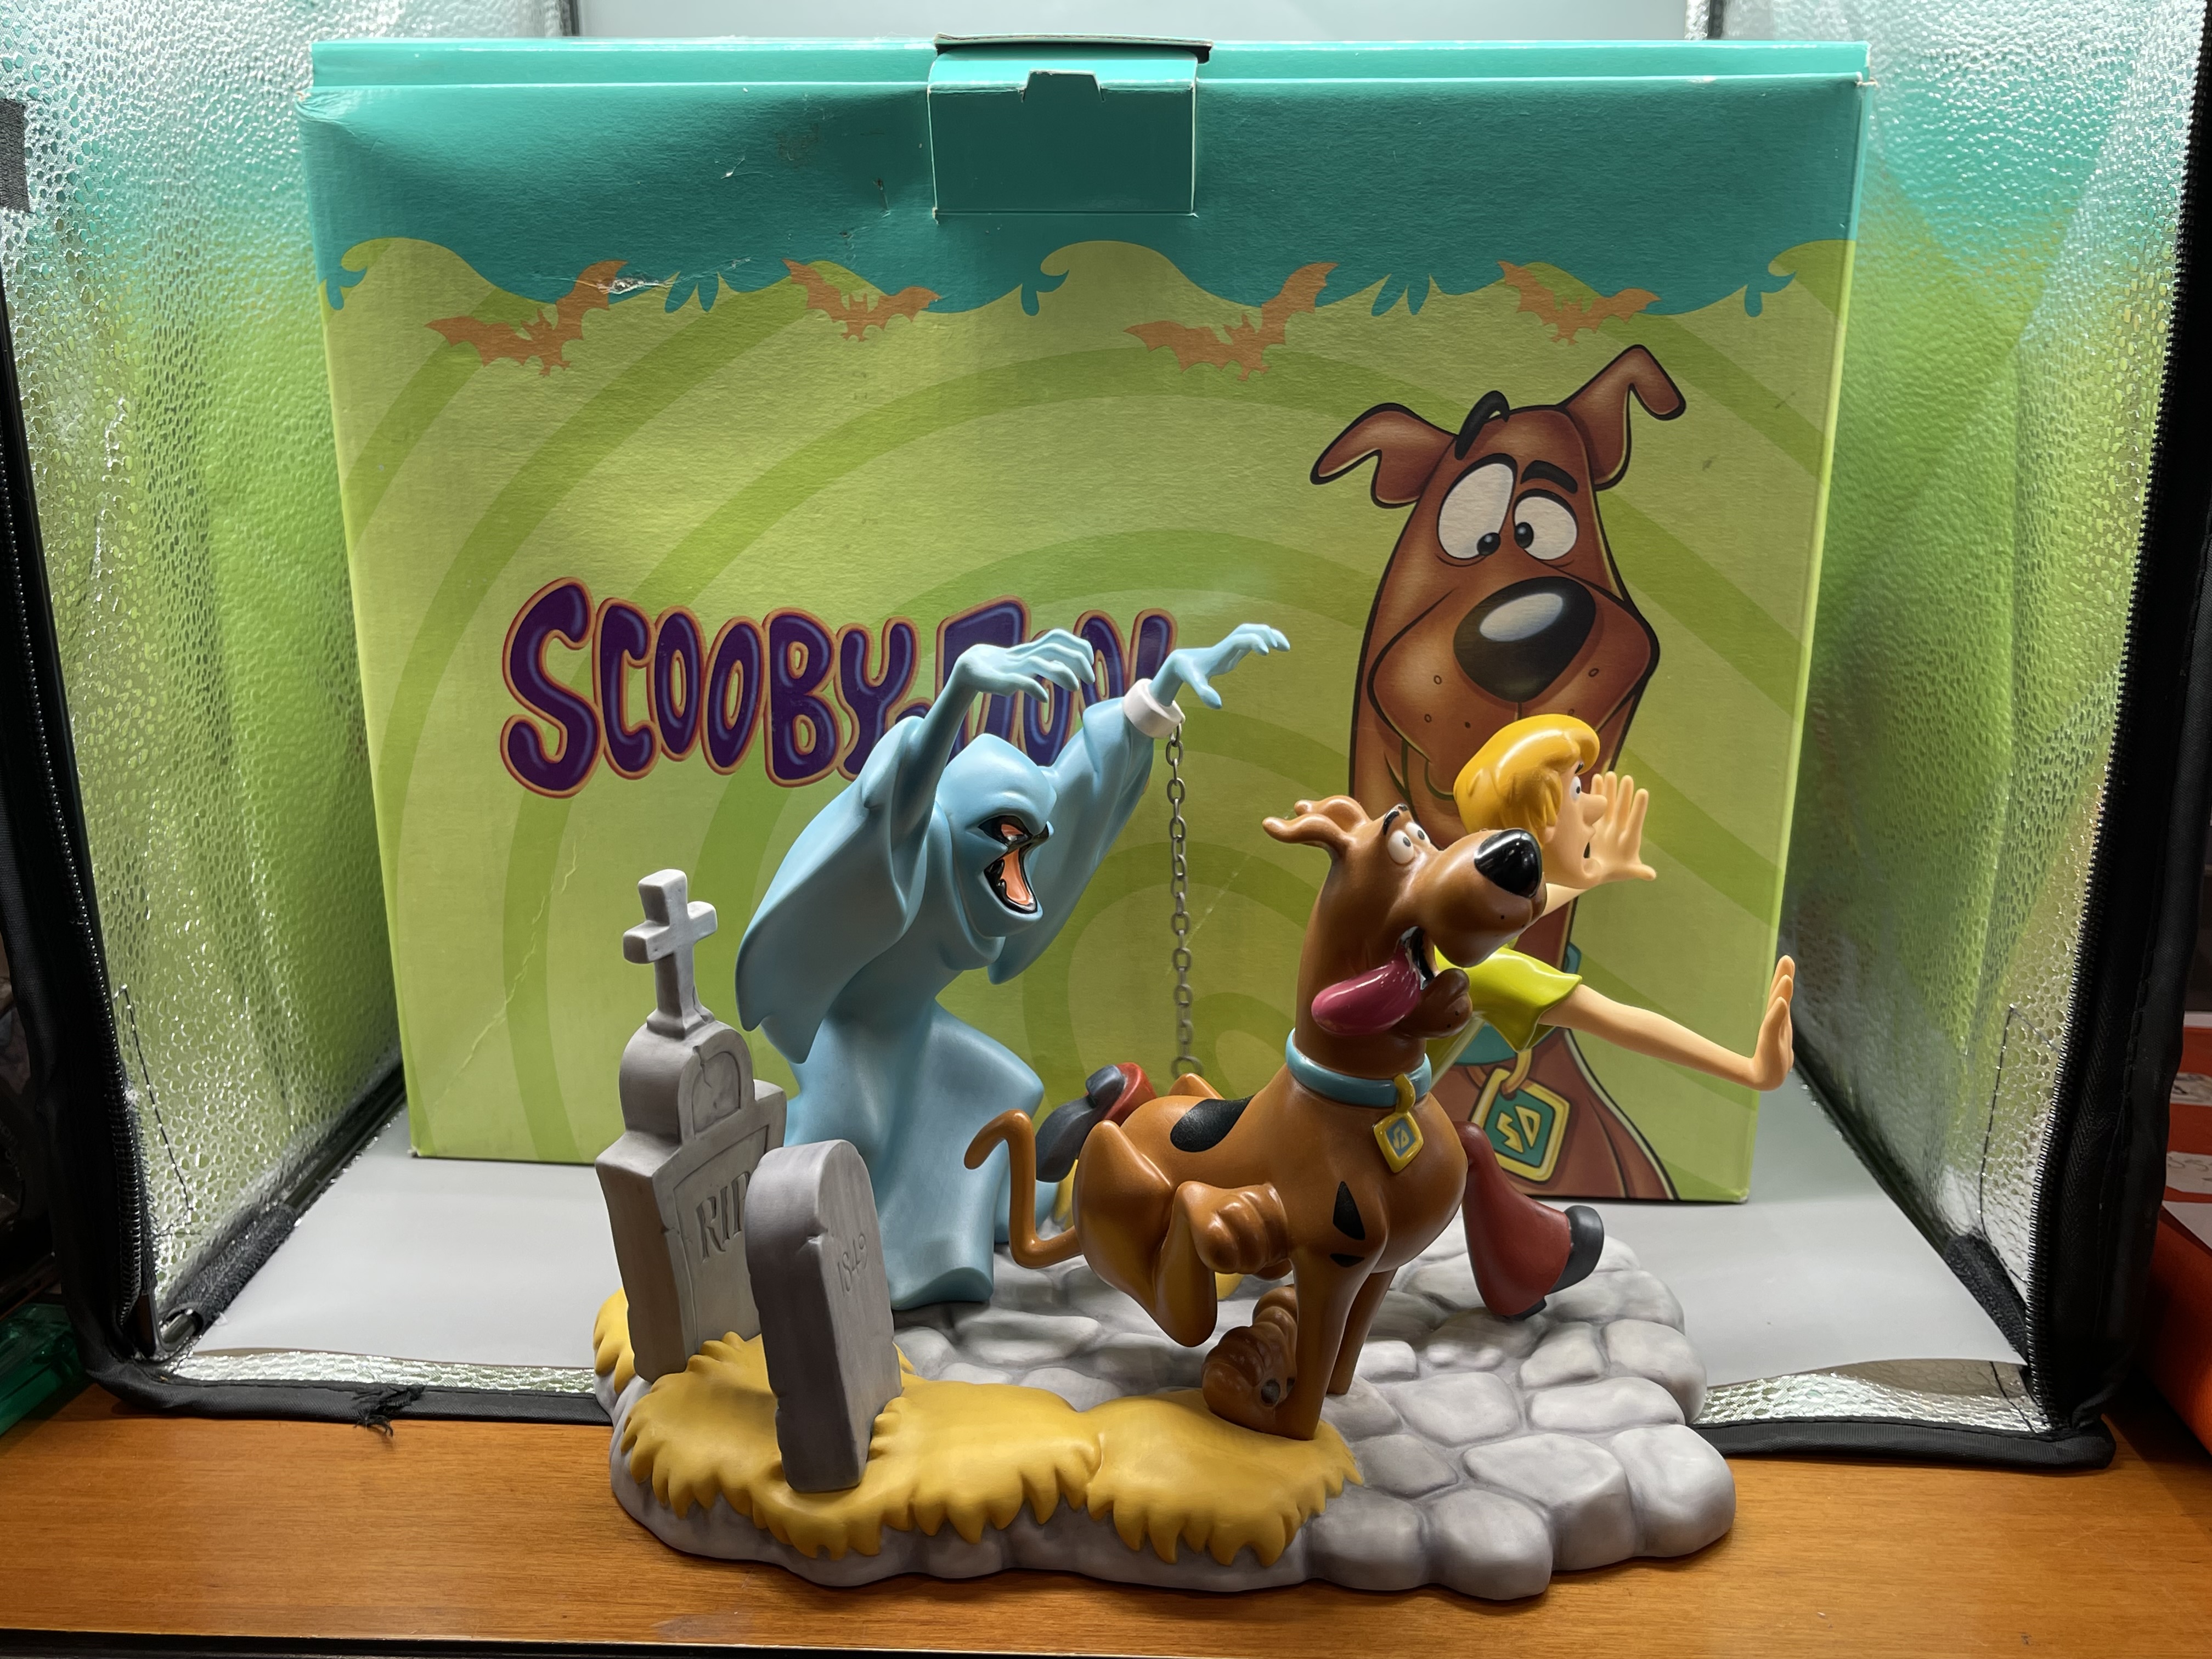 Boxed Wedgewood - Scooby-Doo! - Let's get outta he